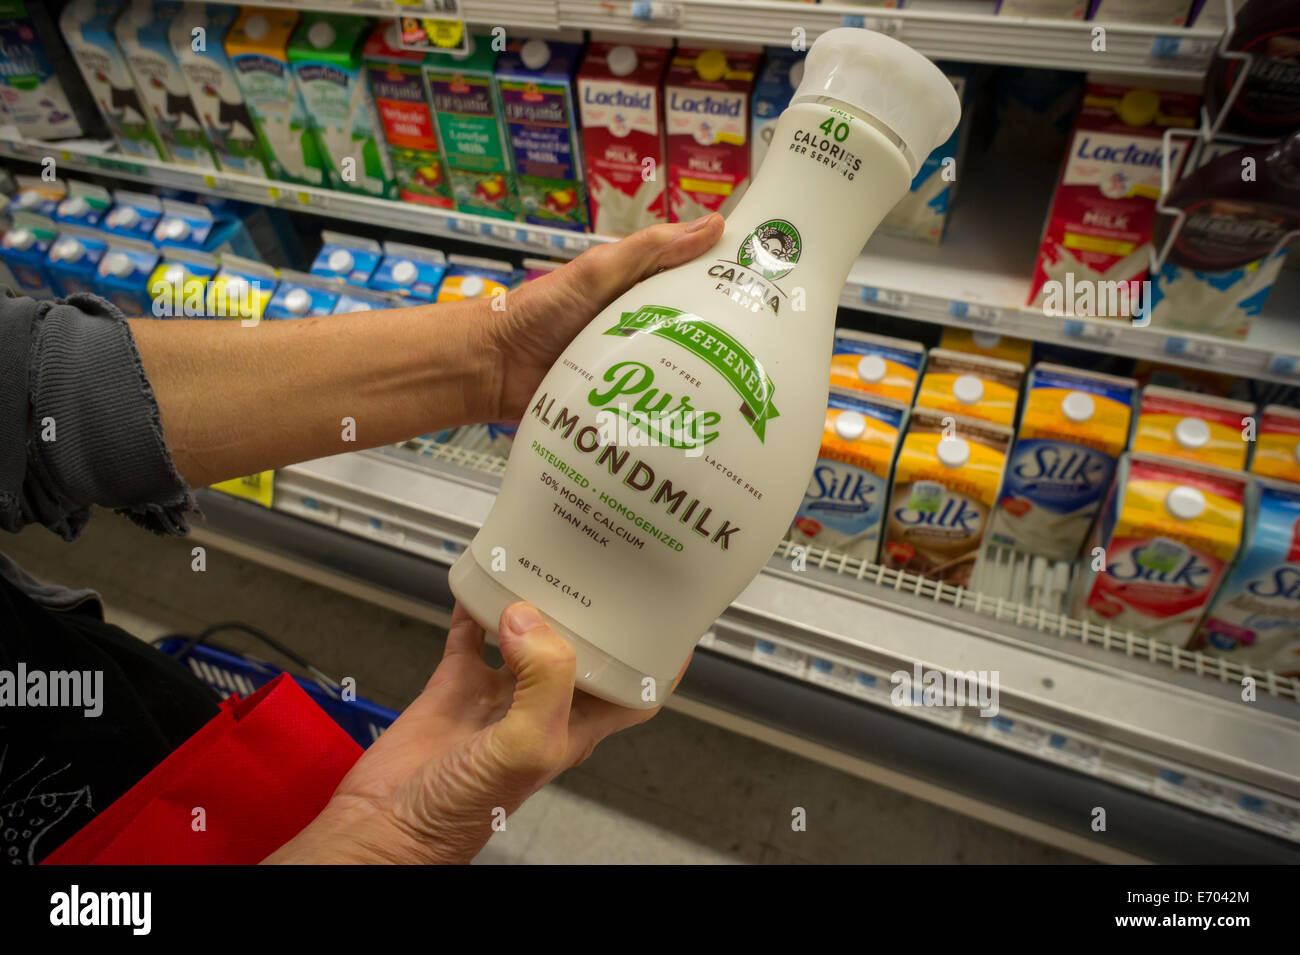 A customer chooses Califia brand almond milk in a supermarket in New York Stock Photo